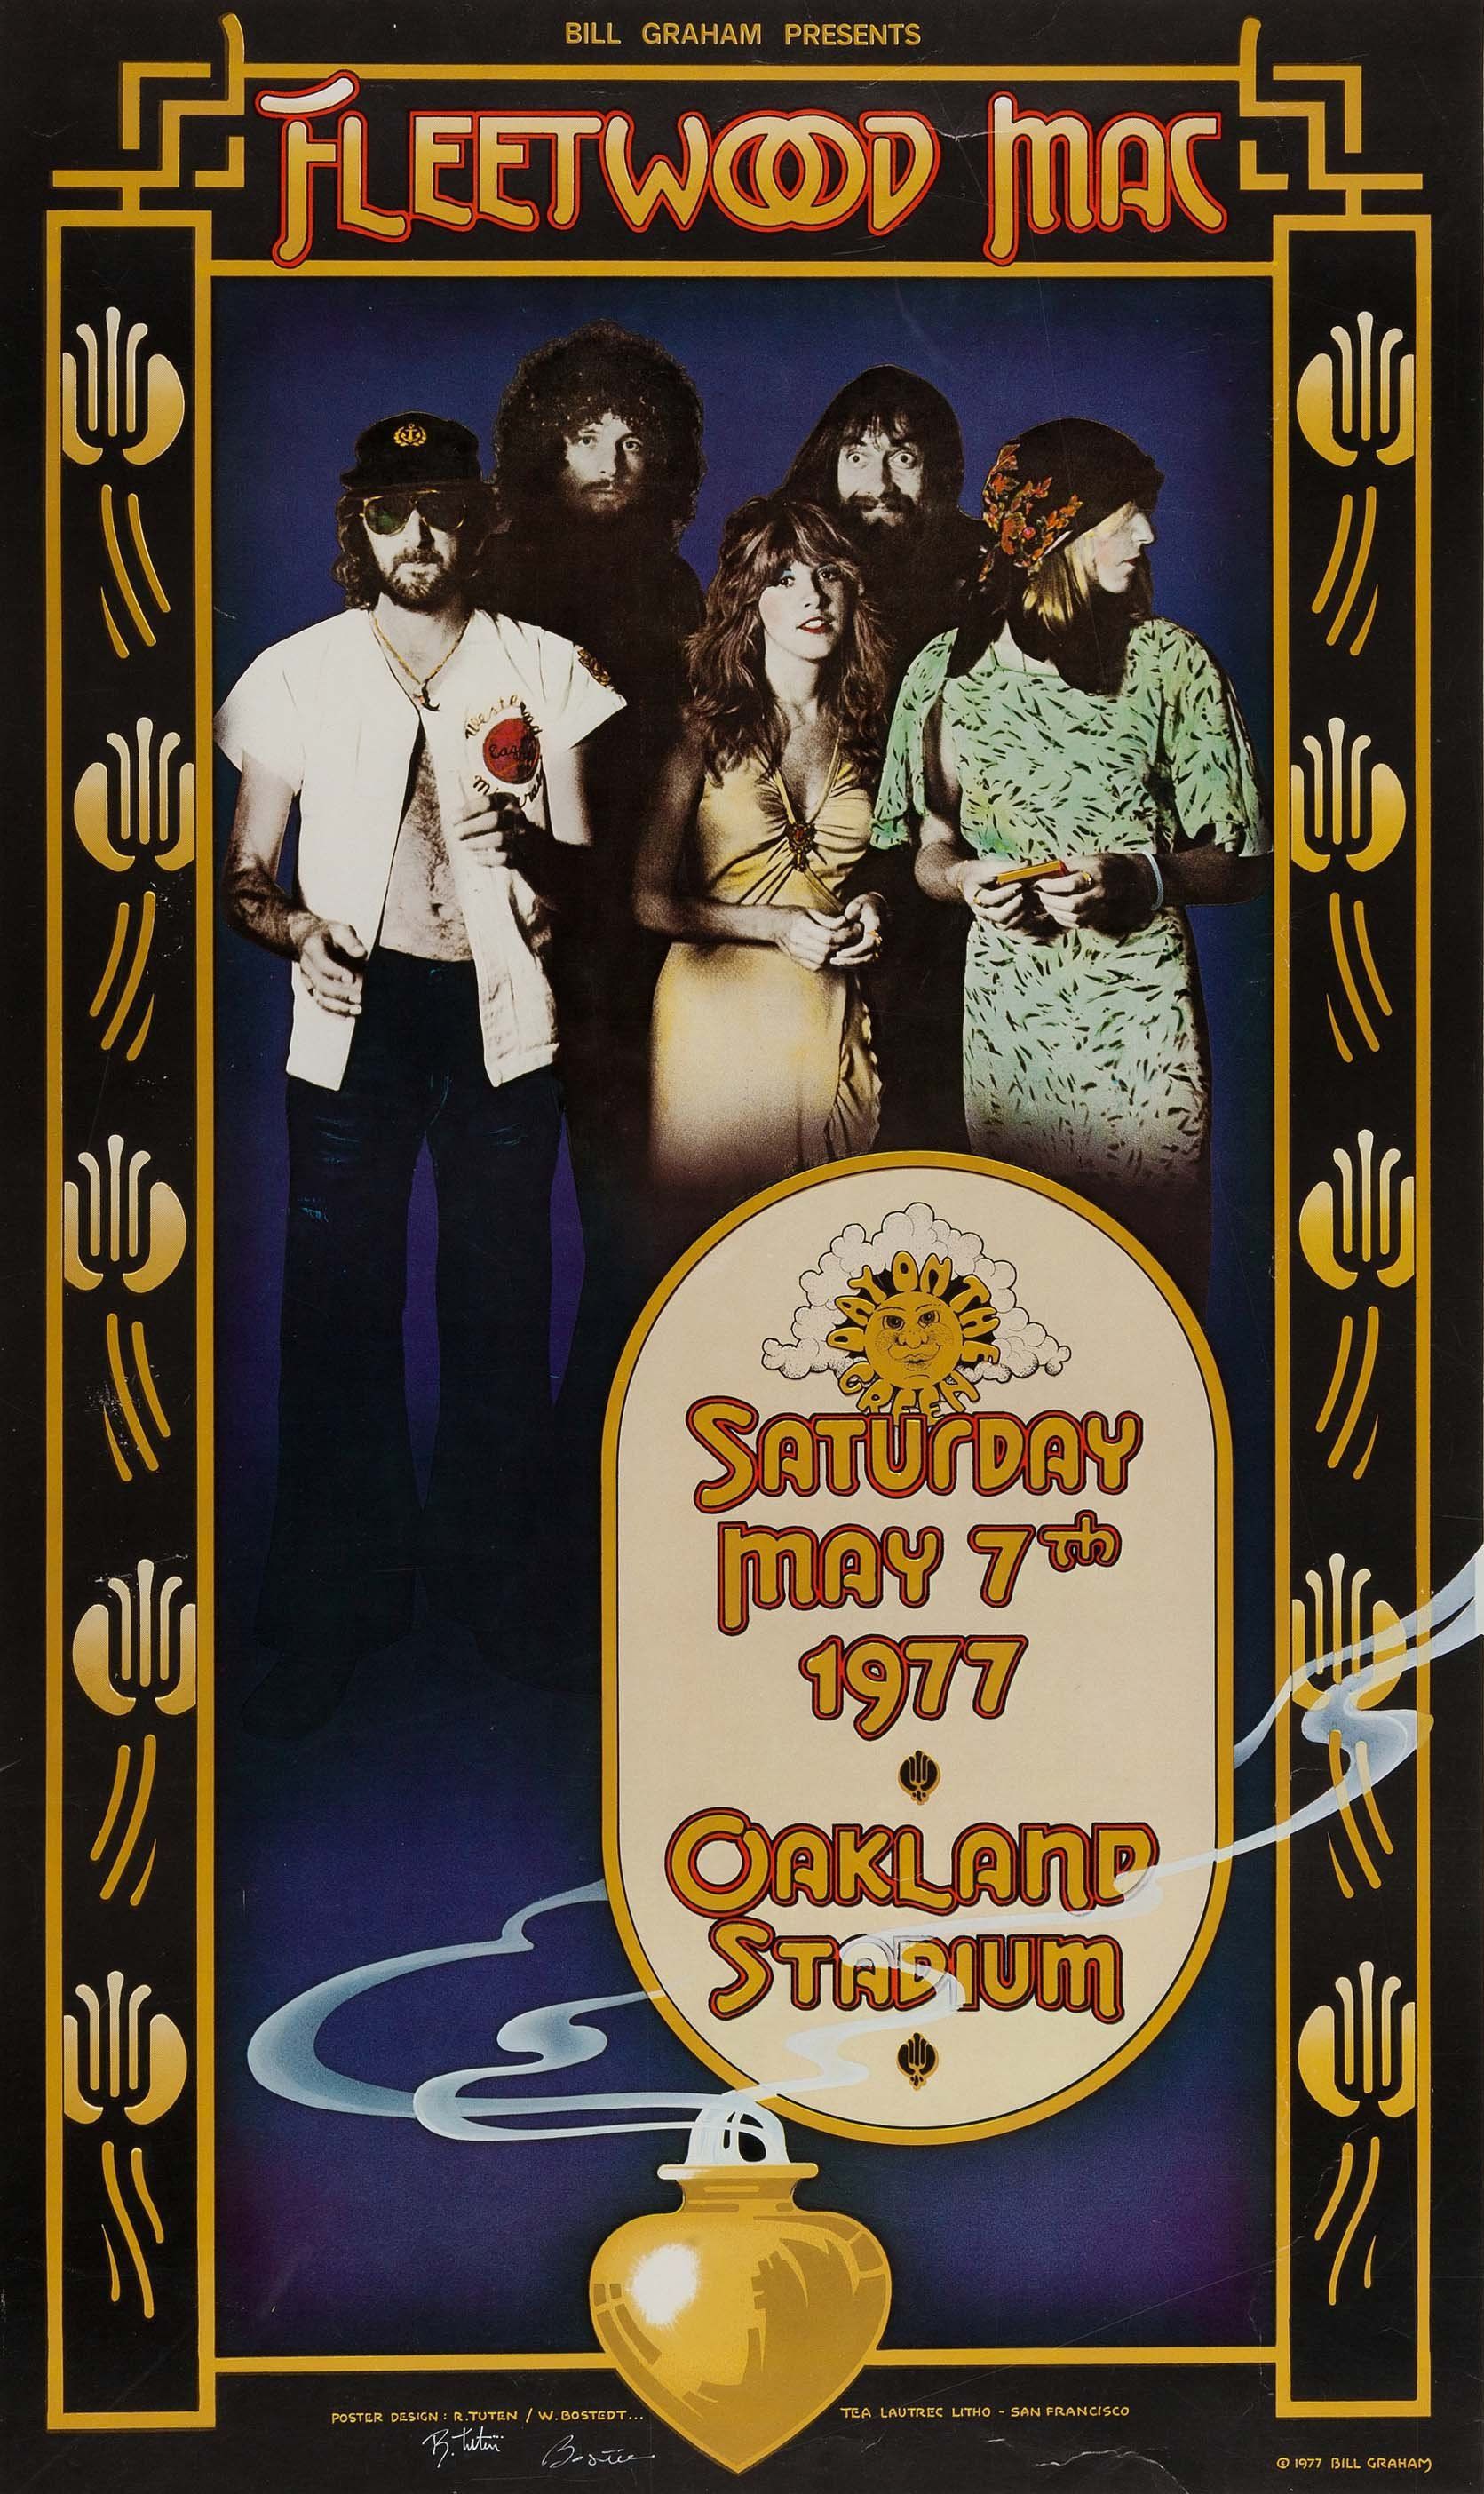 Day On The Green - Oakland Coliseum 1973-1992